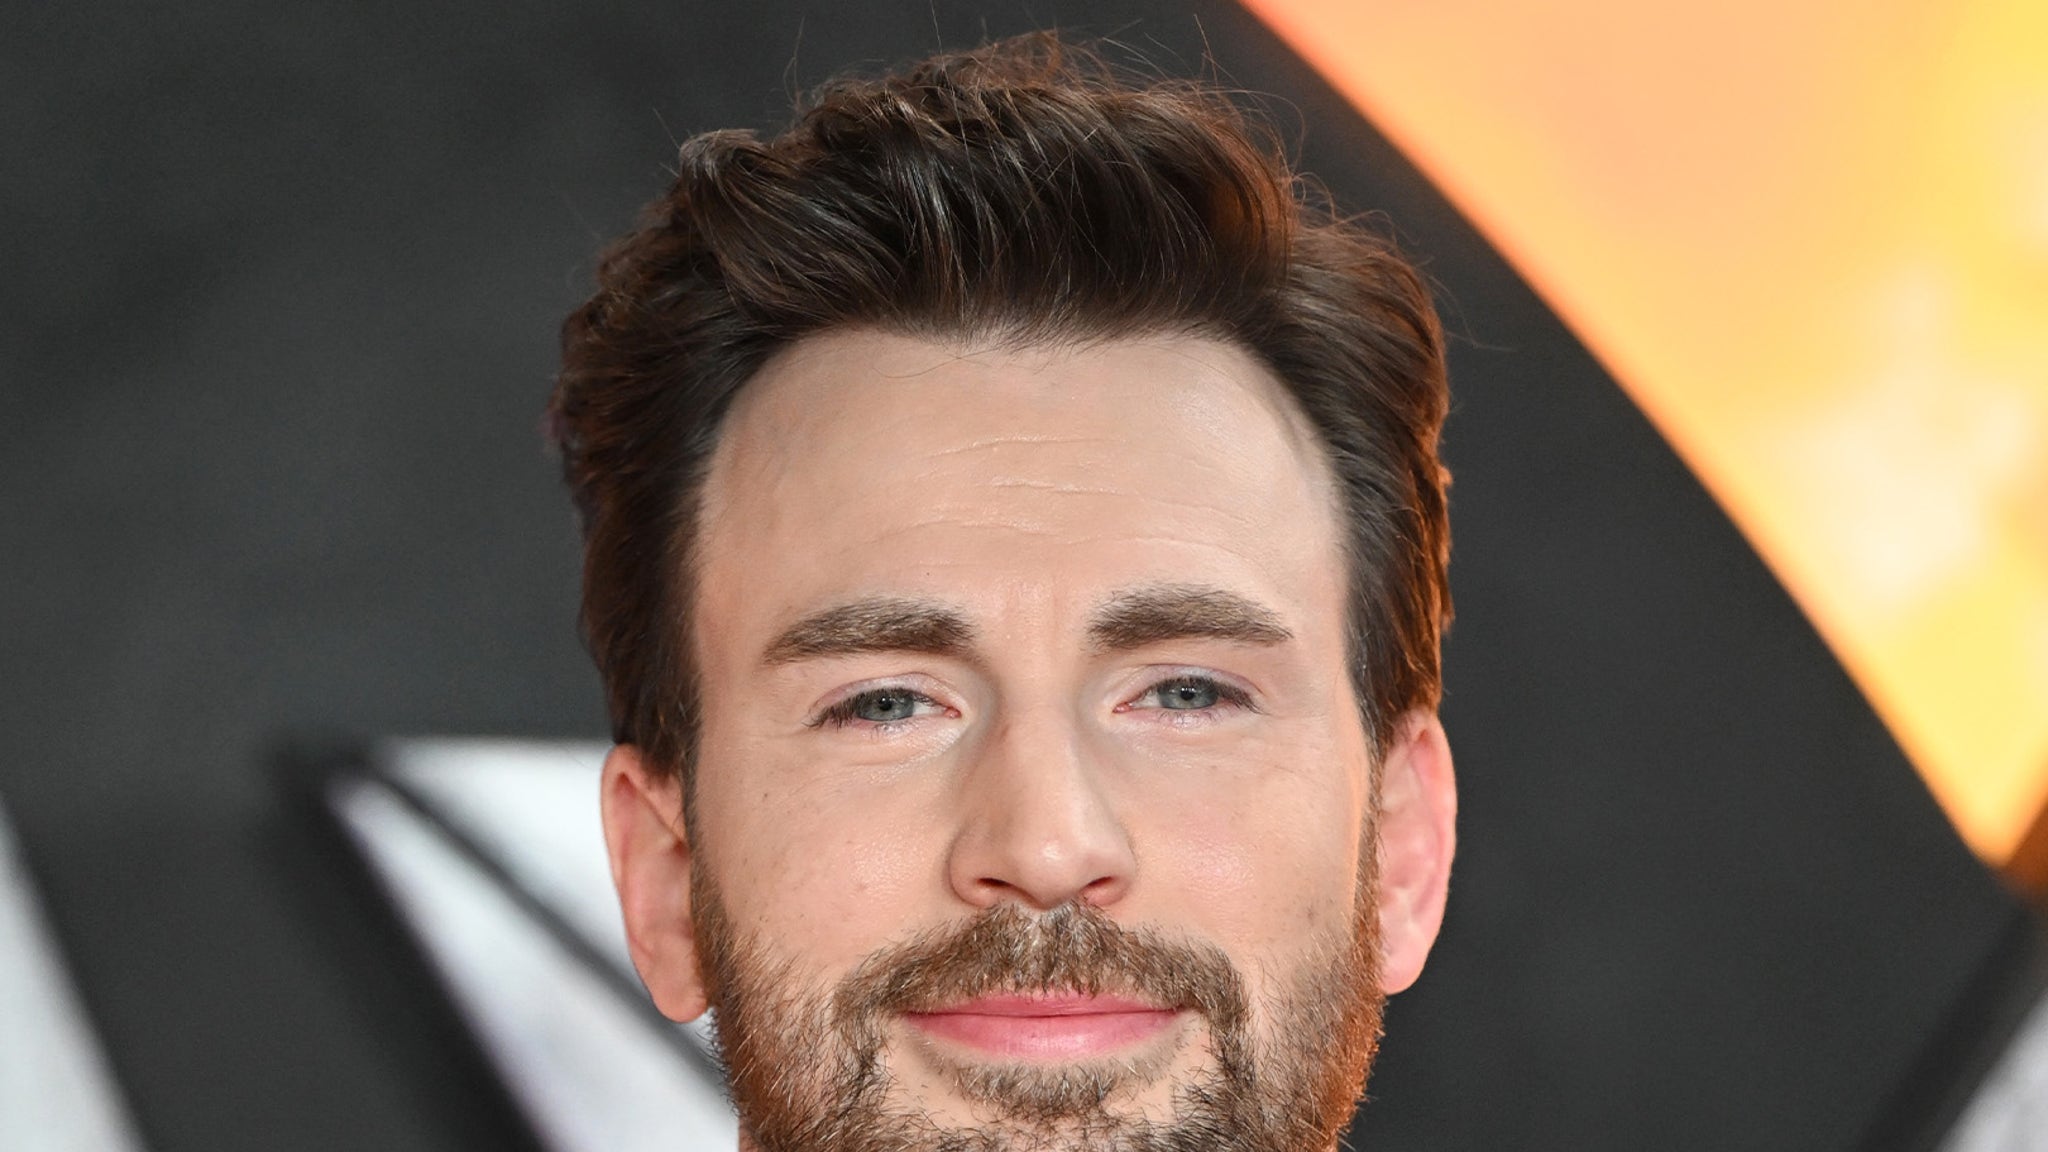 Chris Evans Experienced Something 'Much Worse' Than Being Ghosted